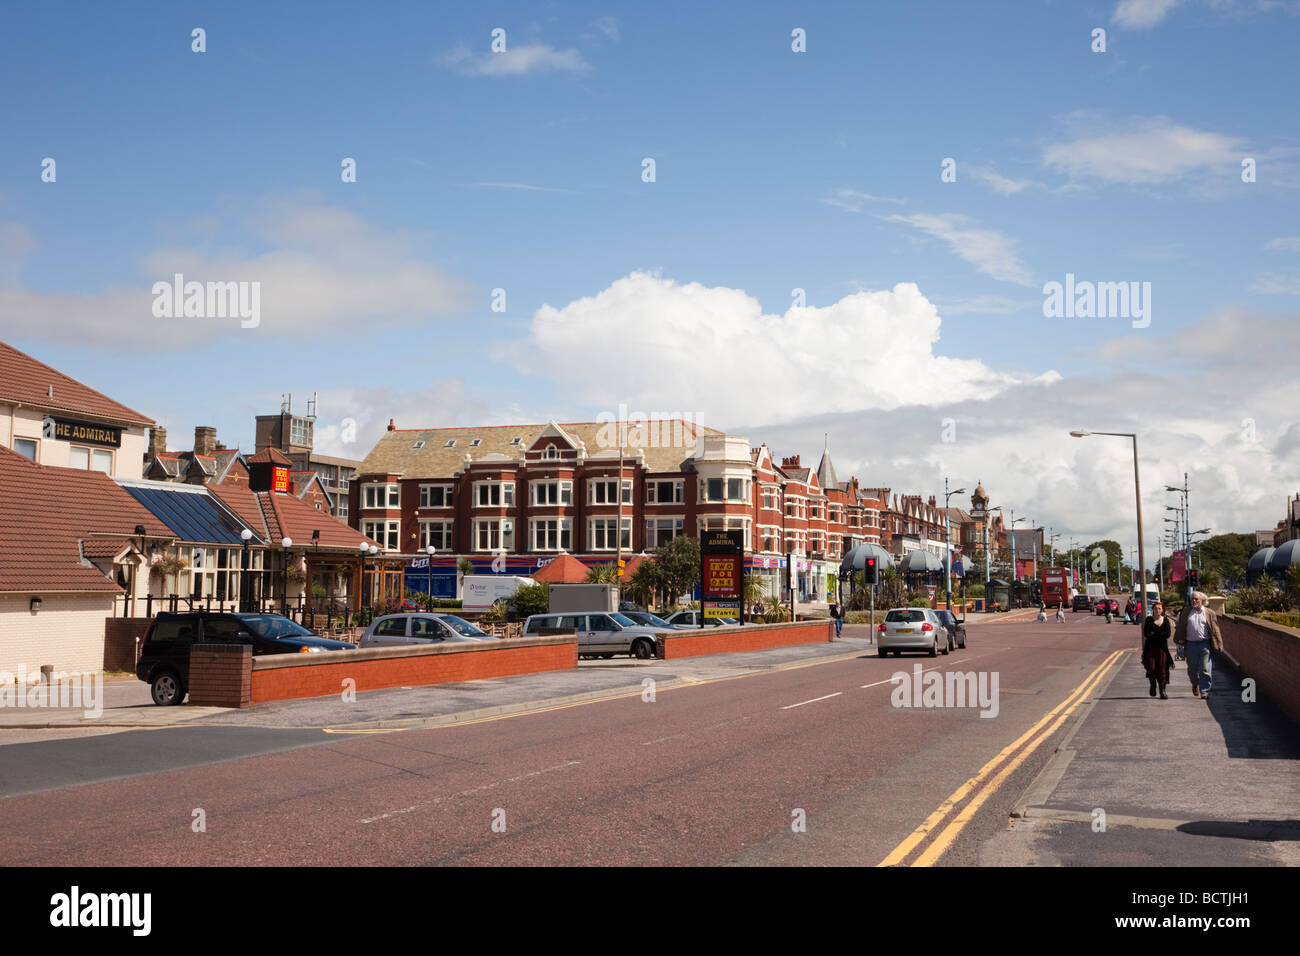 View along wide main street to St Anne's Square in Lytham St Annes Lancashire England UK Britain Stock Photo